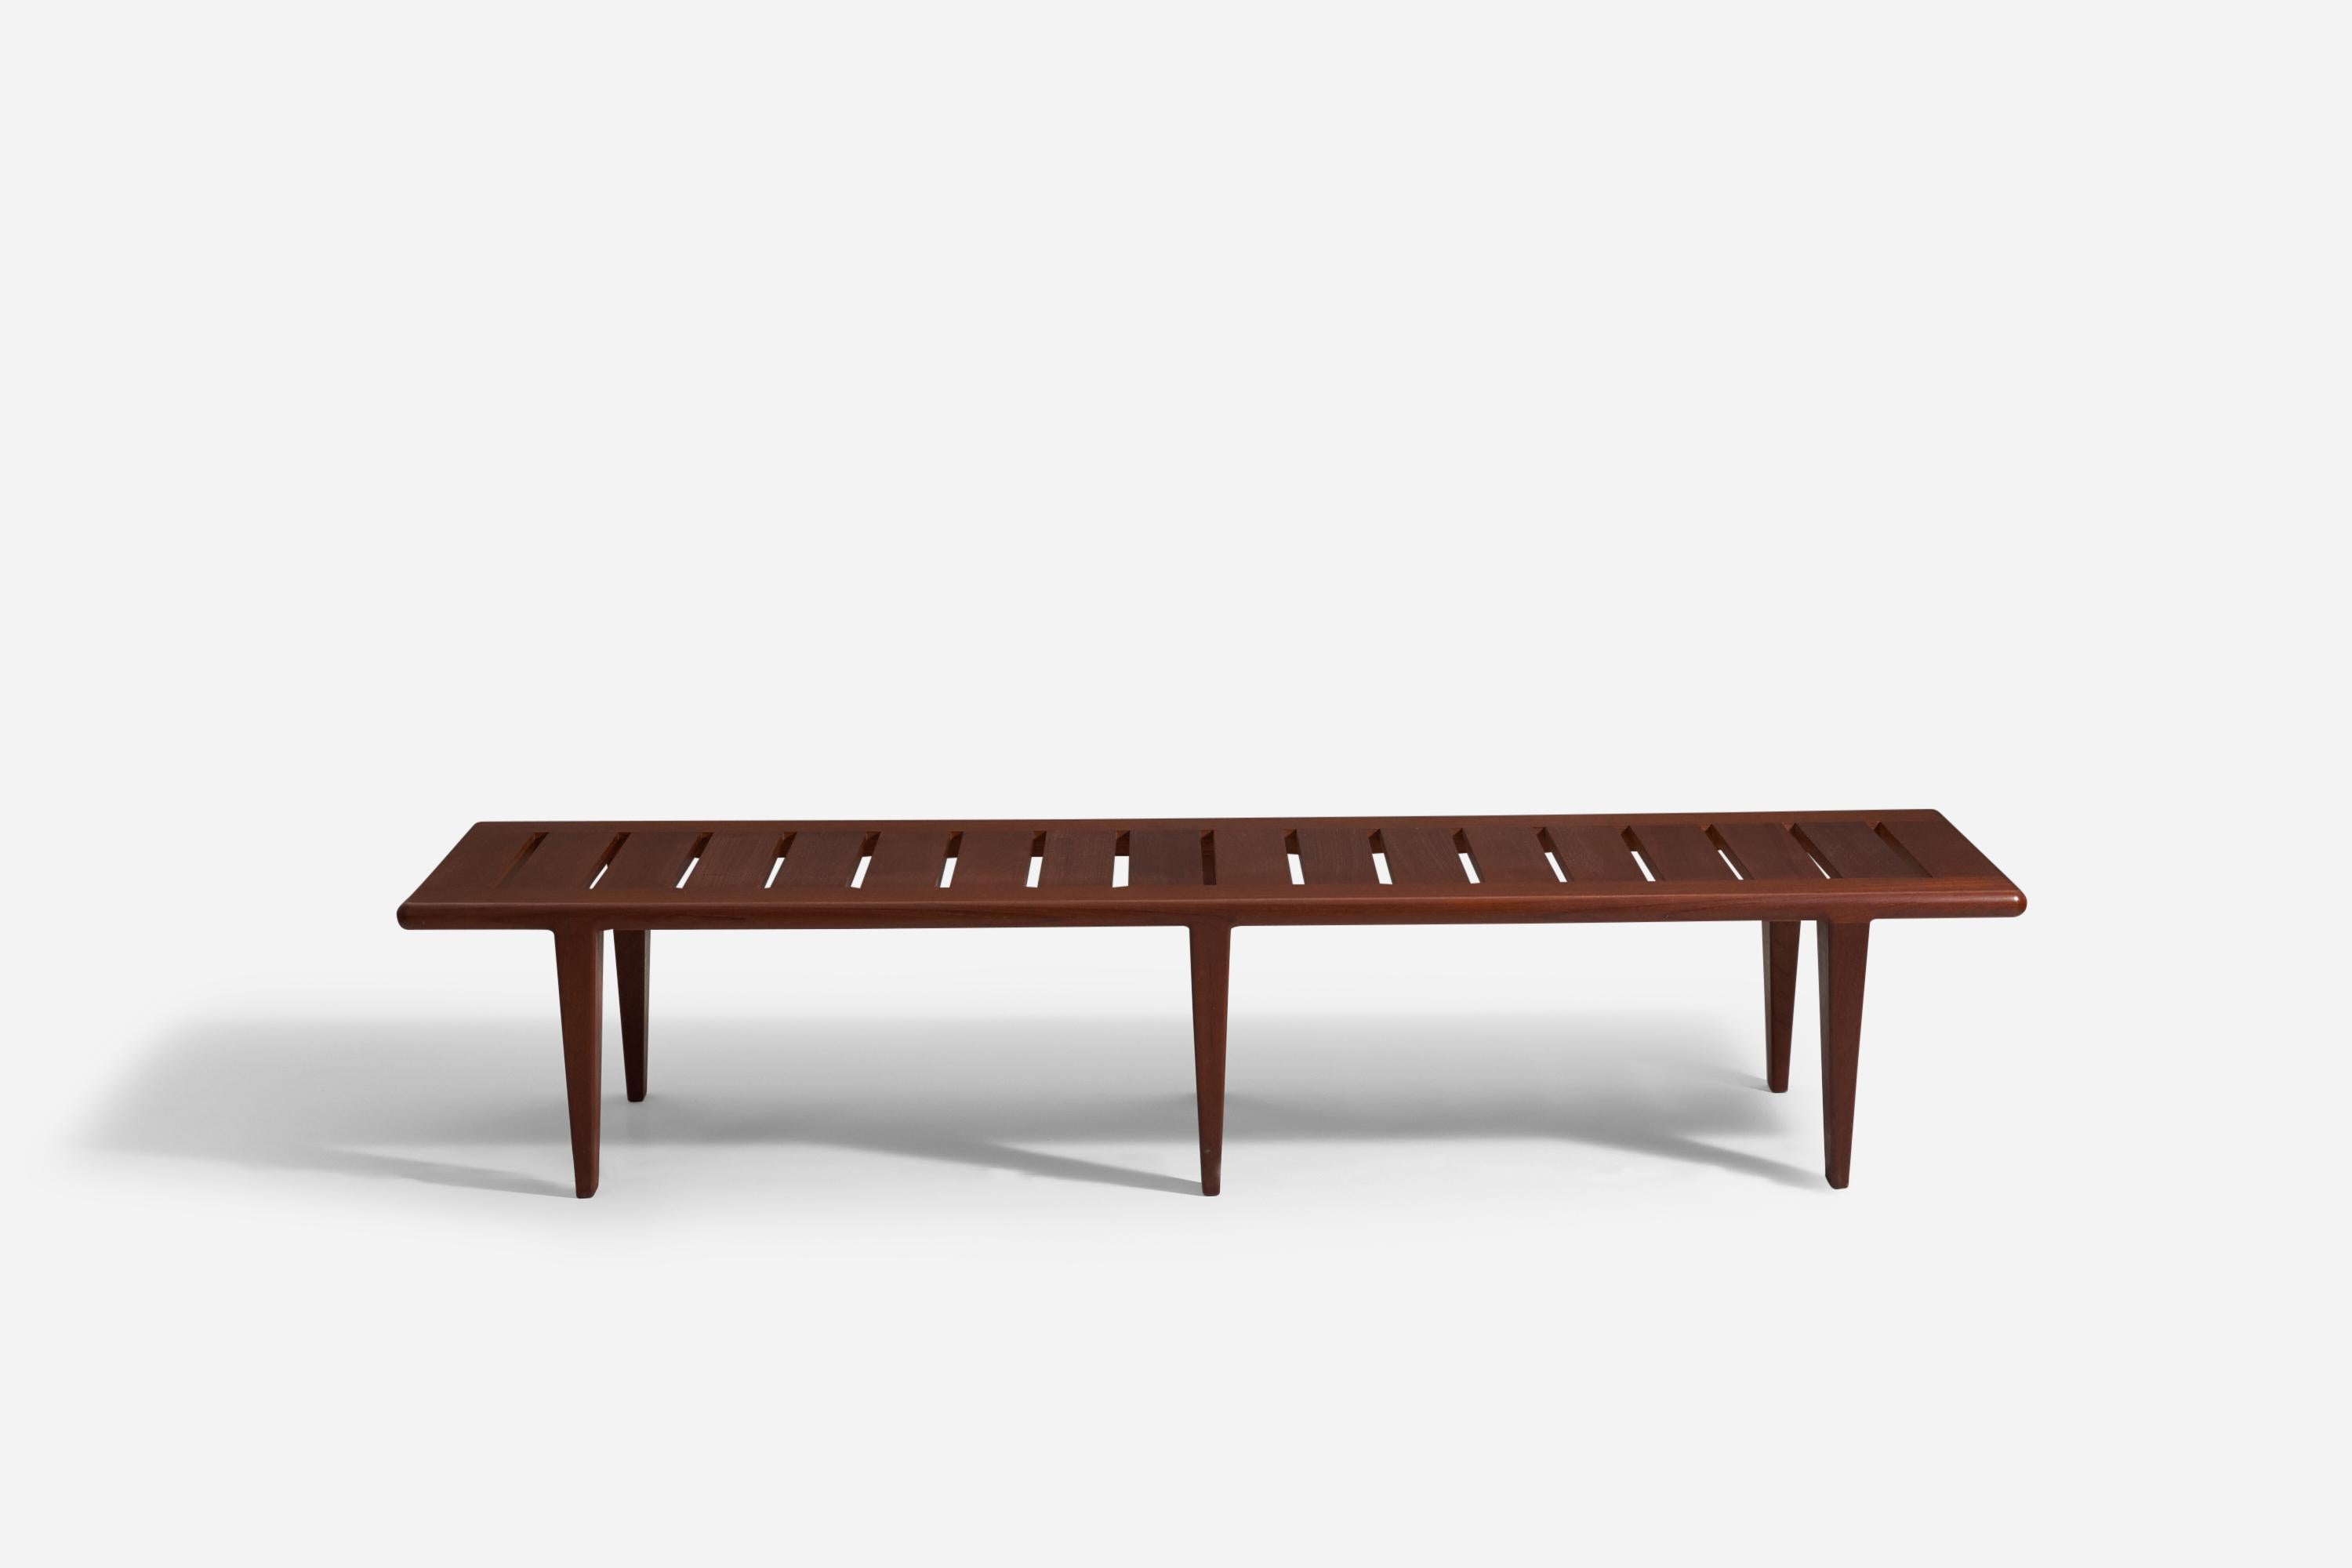 A bench designed by Hans Wegner, produced by cabinet maker Johannes Hansen. In solid teak. With makers metal plaque to underside of bench.

Wegner worked contemporary to designers such as Finn Juhl, Edvard and Tove Kindt-Larsen, Peder Moos, and